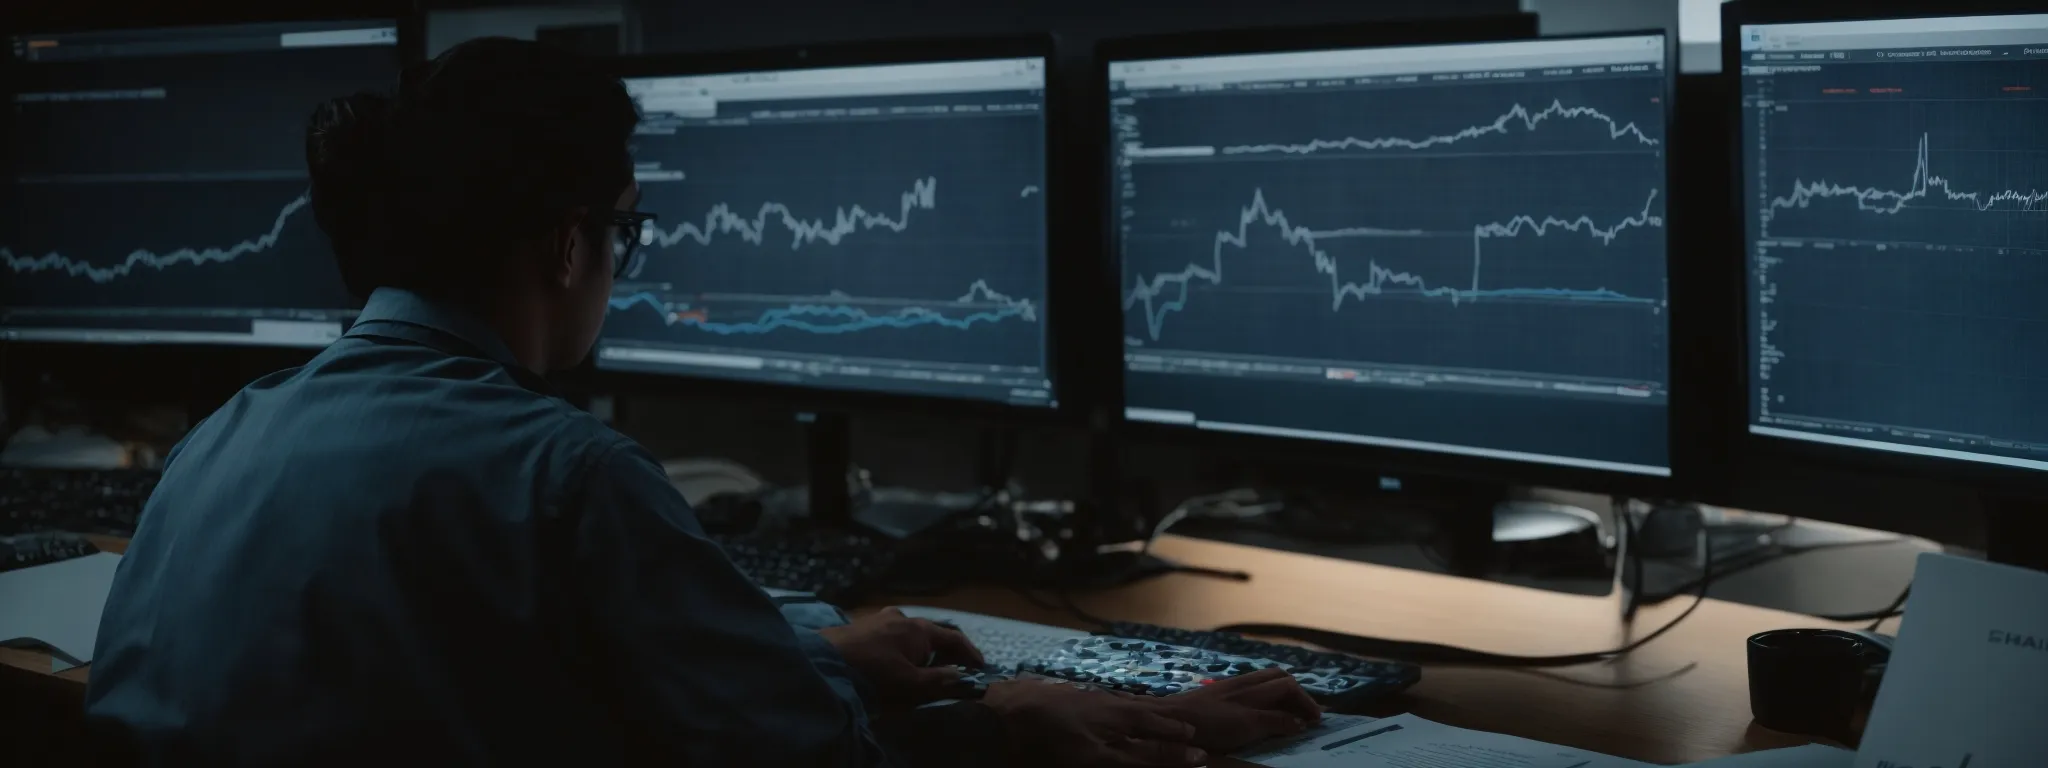 a person sitting at a computer with graphs on the screen, deep in analysis of seo strategies.